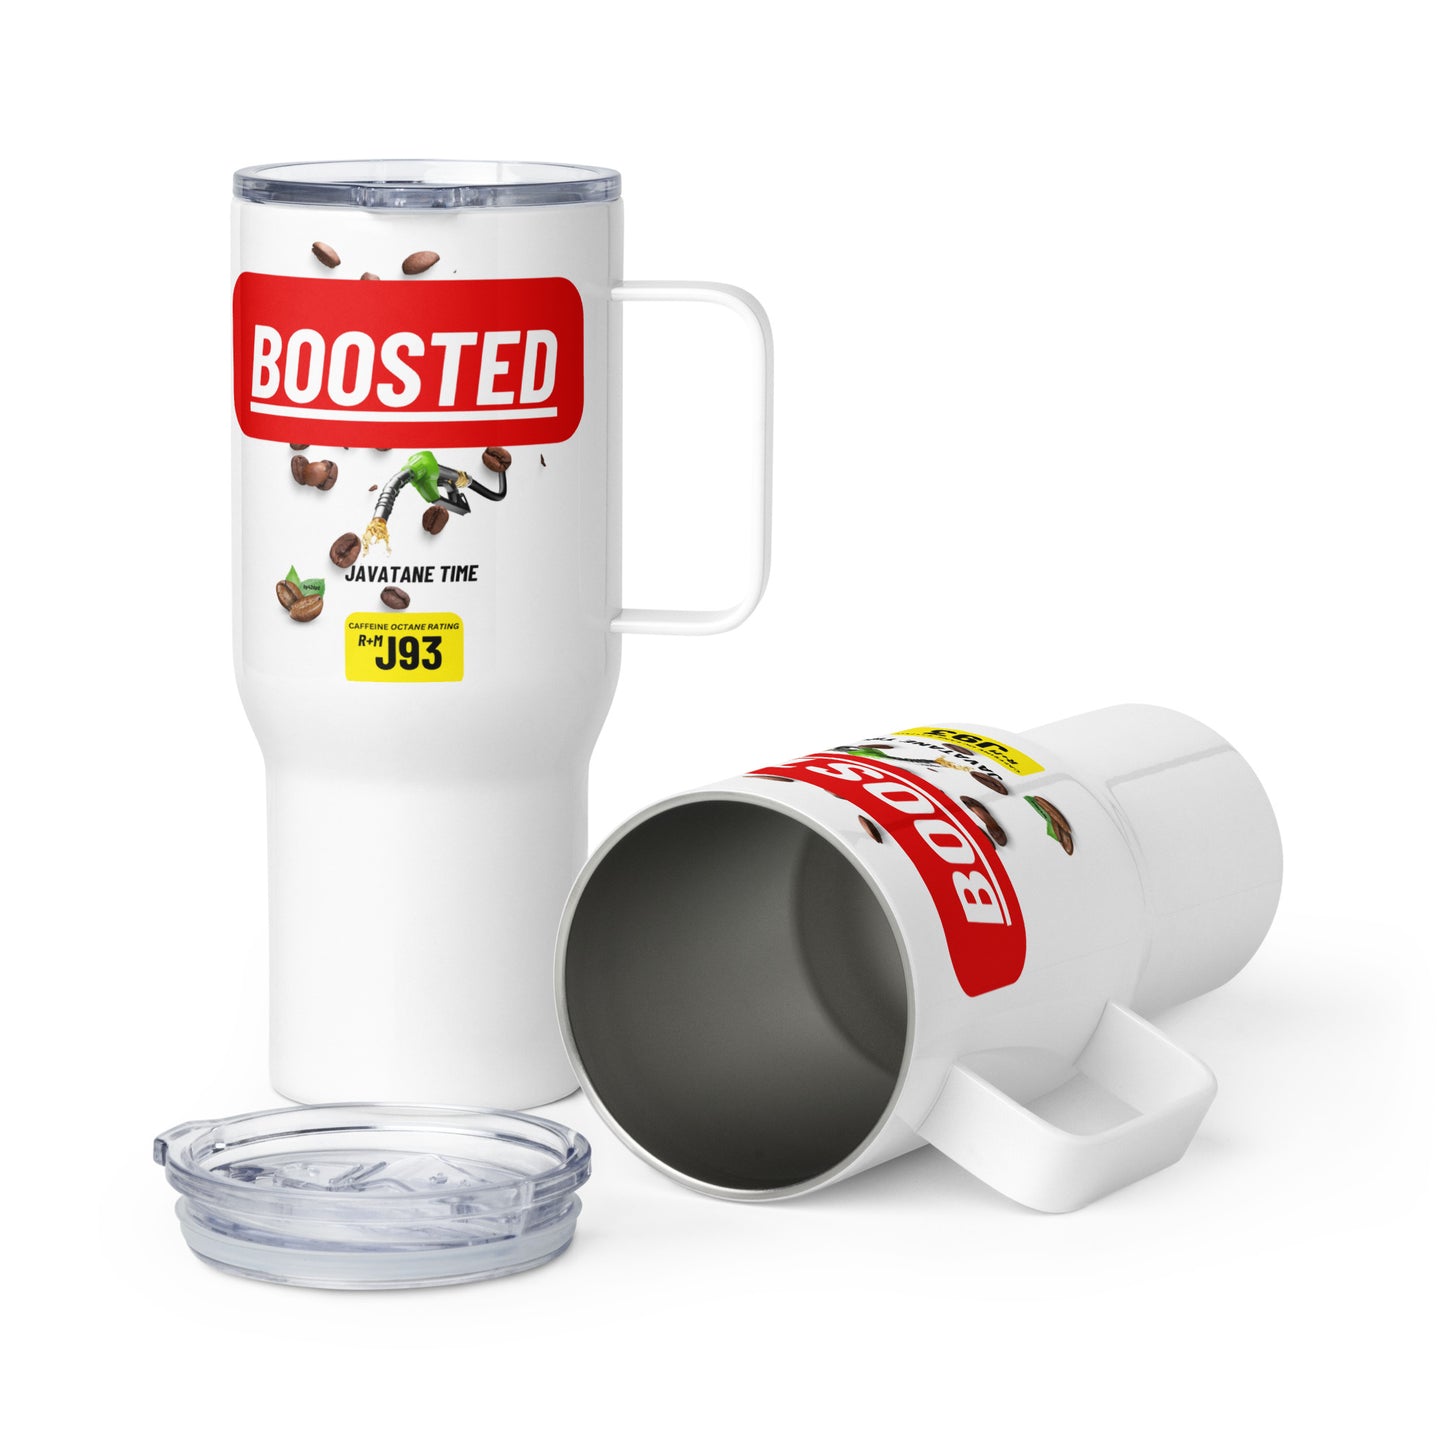 BOOSTED Accent Red Large Travel Mug